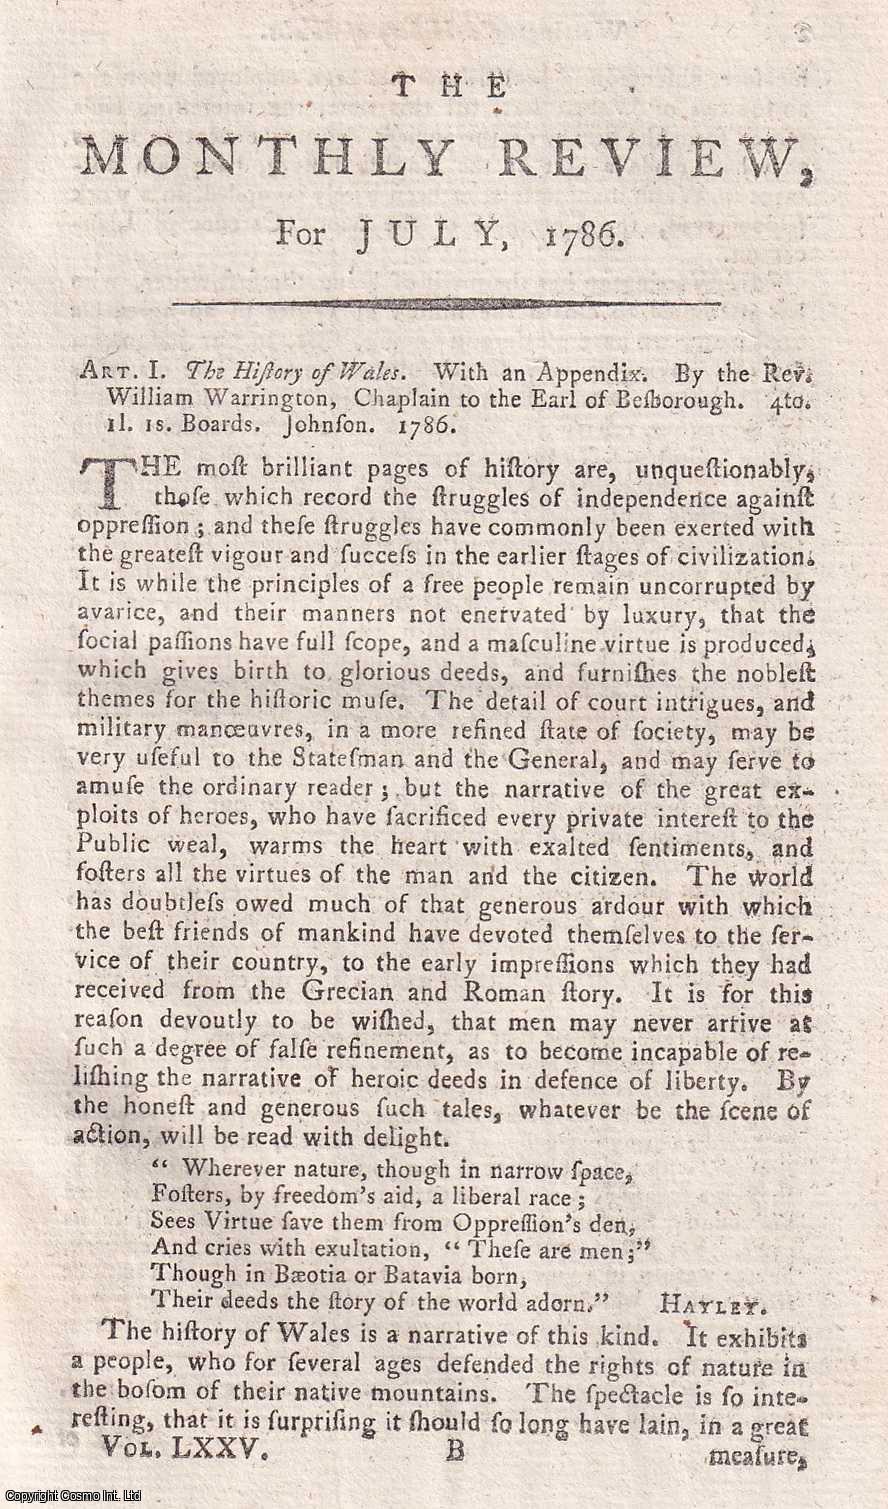 Author Not Stated - The History of Wales, by the Rev. William Warrington, Chaplain to the Earl of Besborough. An original essay from the Monthly Review, 1786. No author is given for this article.